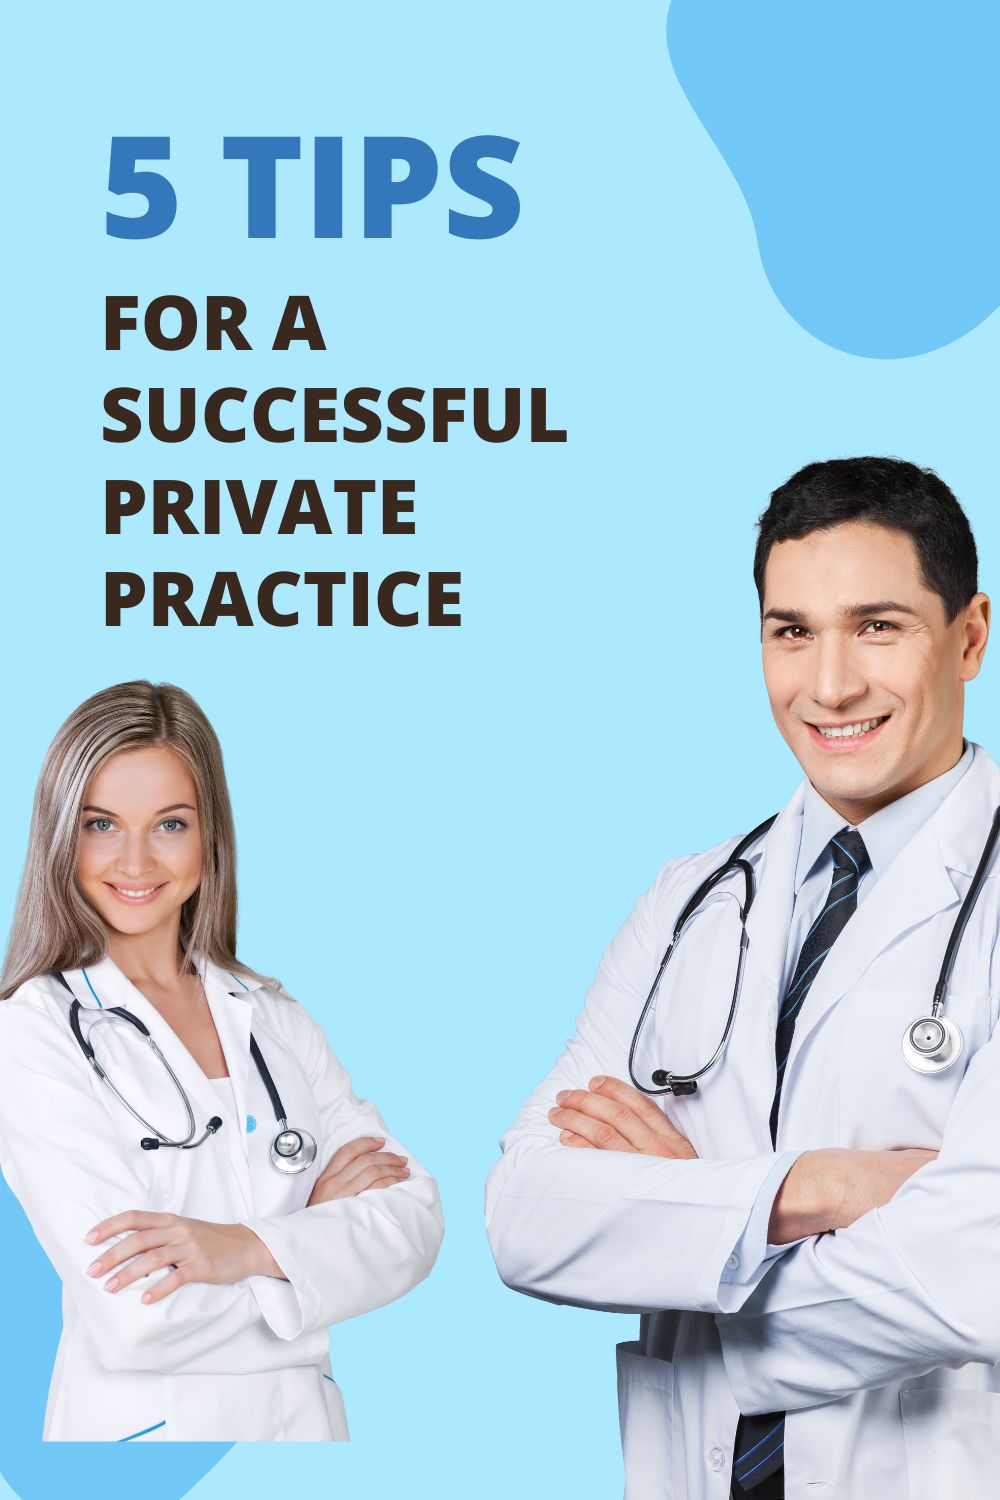 Whether you’re a doctor, lawyer, or any other career-driven entrepreneur who wants to start a private practice business, it’s so important to know that the journey isn’t entirely simple.